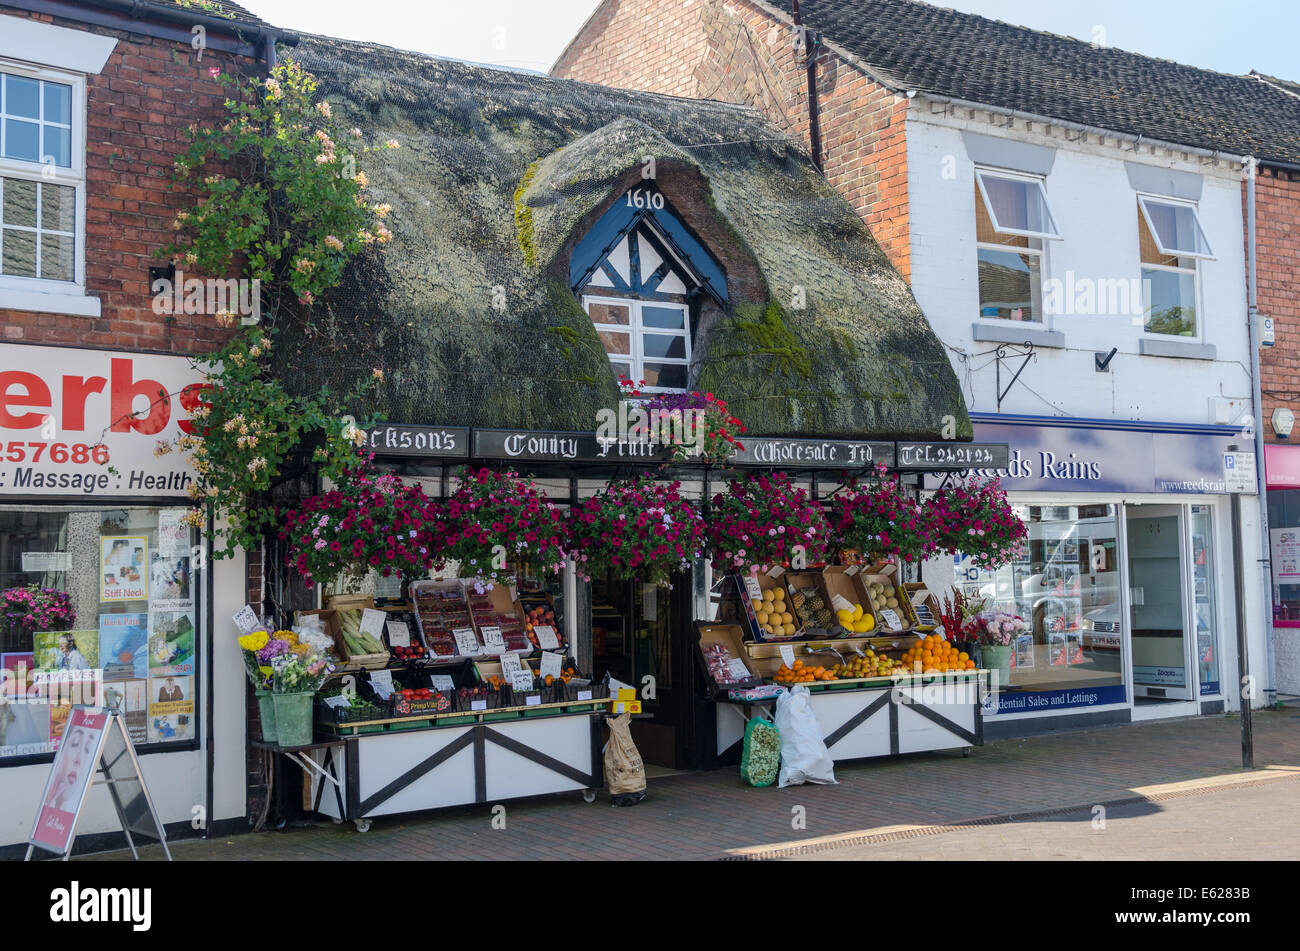 Jacksons County Fruit Shop in Mill Street, Stafford which was built in 1610 Stock Photo